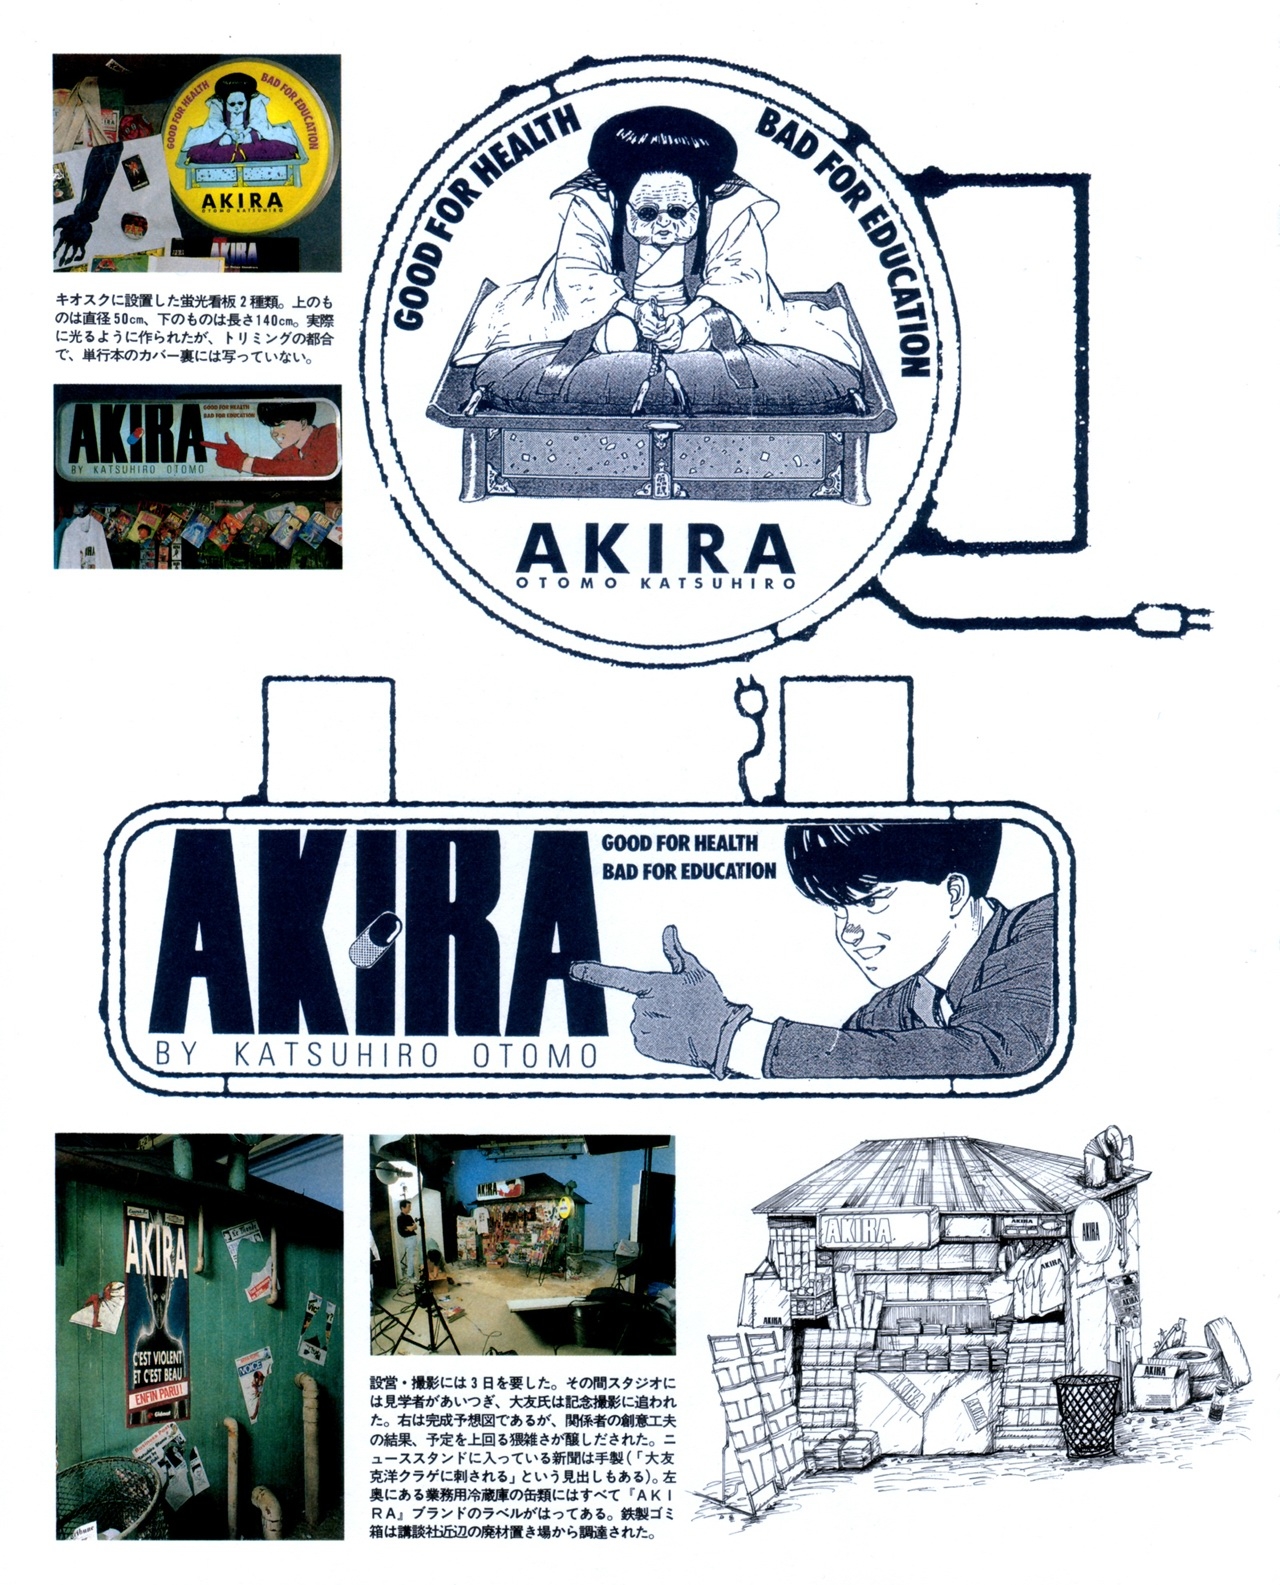 Akira club - The memory of Akira lives on in our hearts! 217